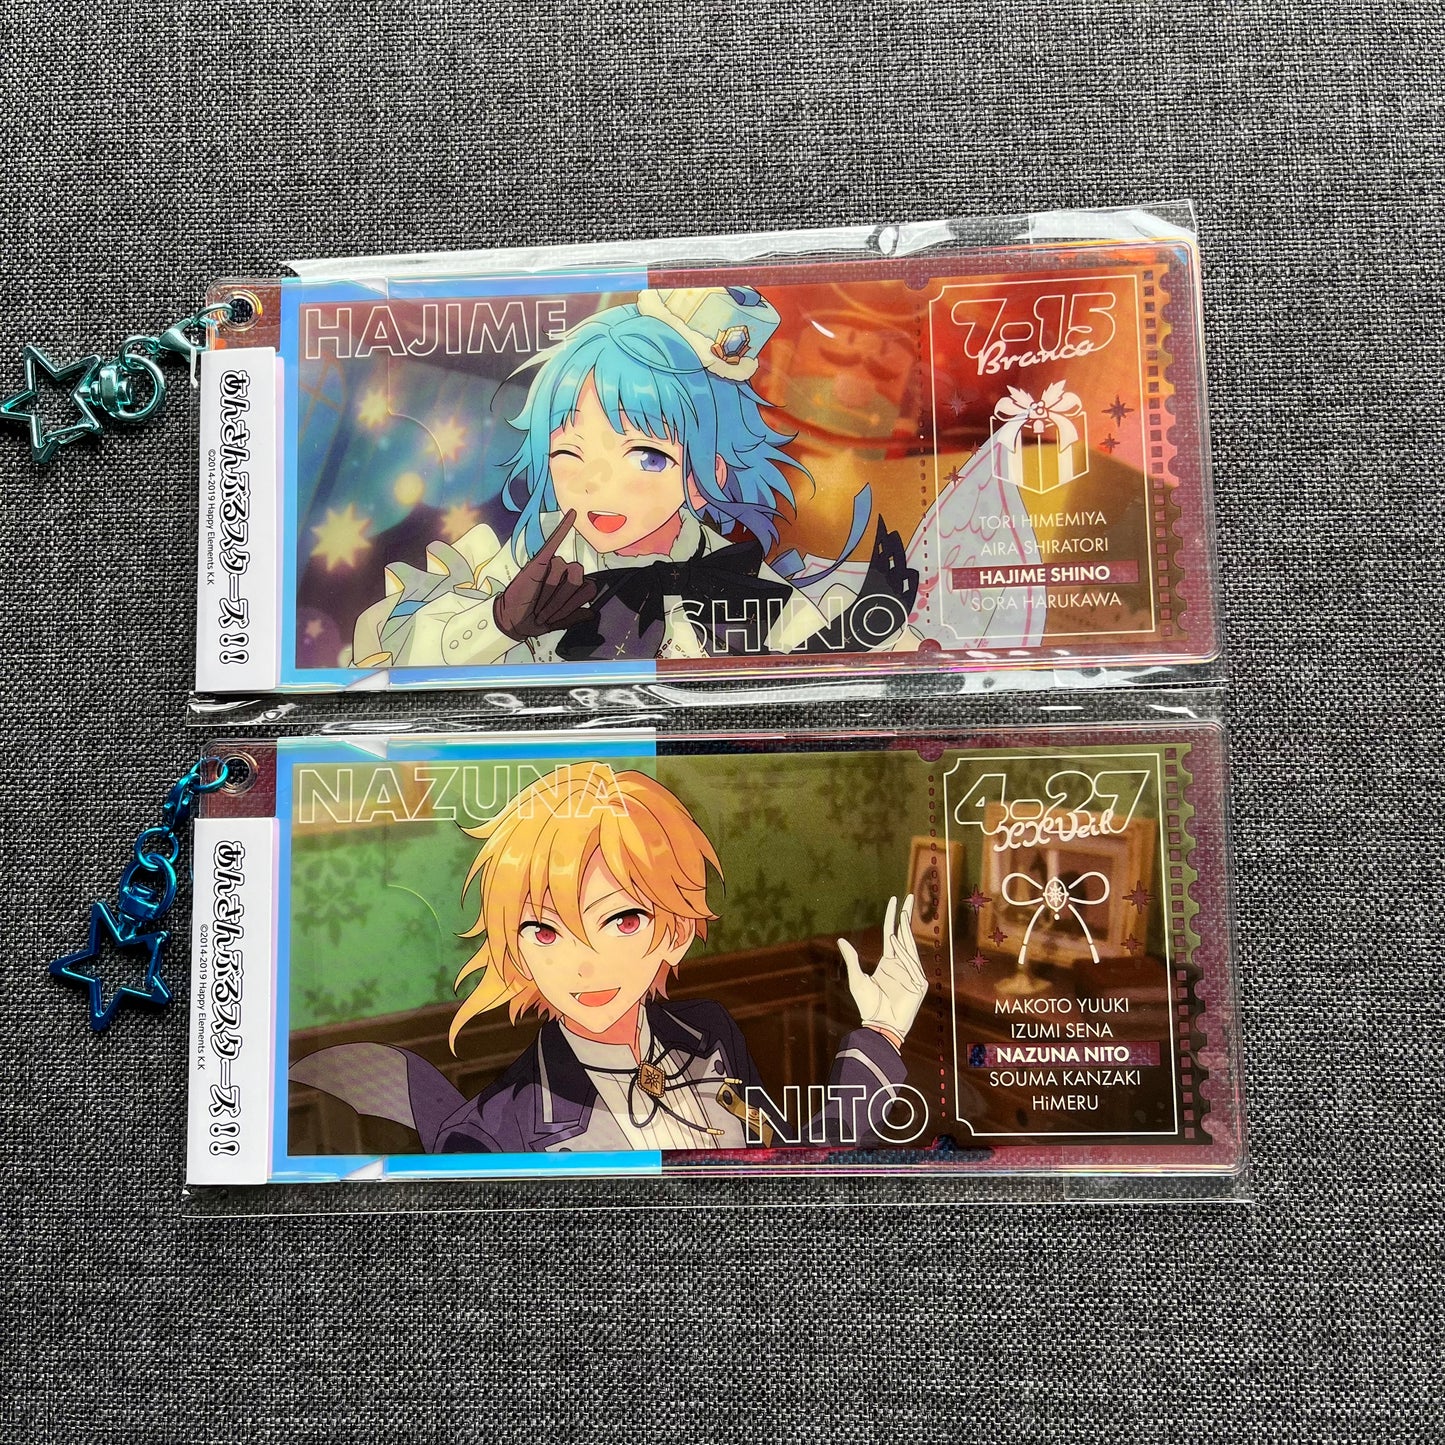 Enstars Holographic Character Ticket Charm (Rabbits Members)